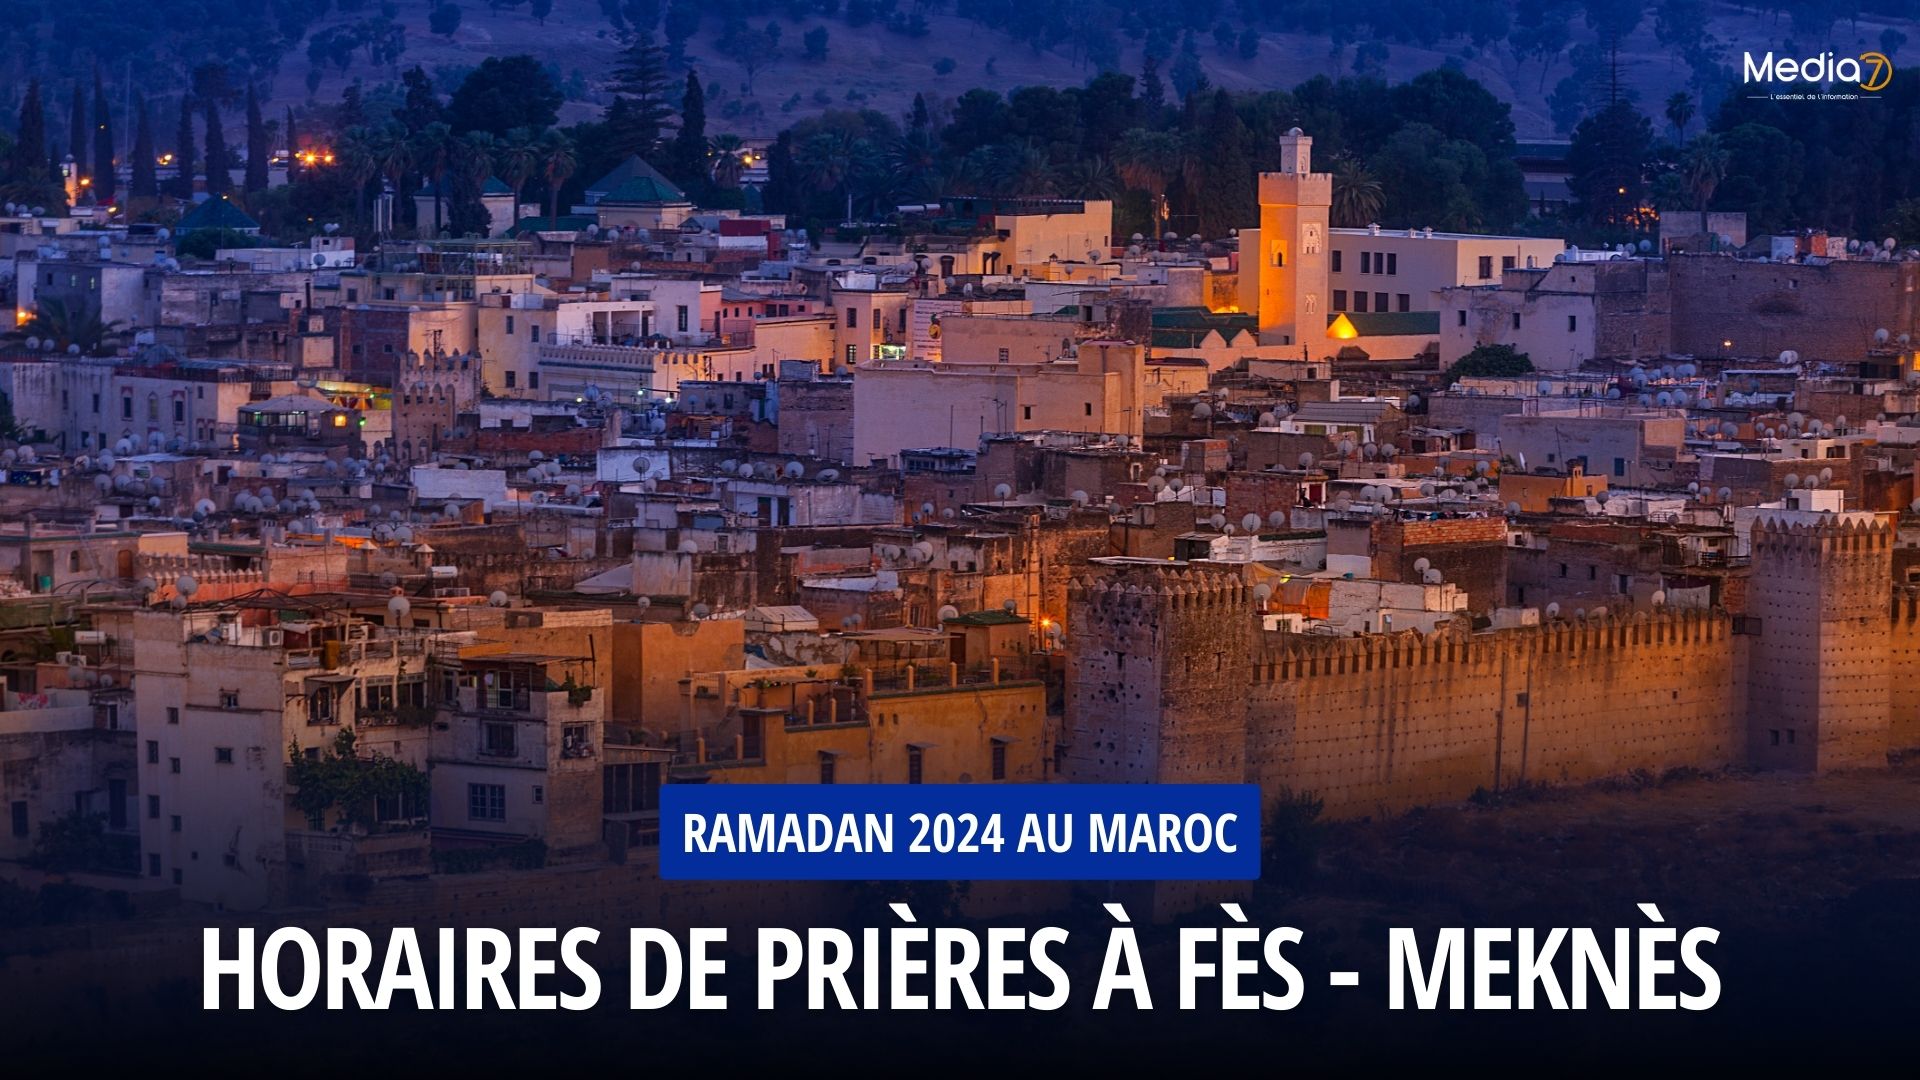 Prayer times for the month of Ramadan in Fez - Meknes